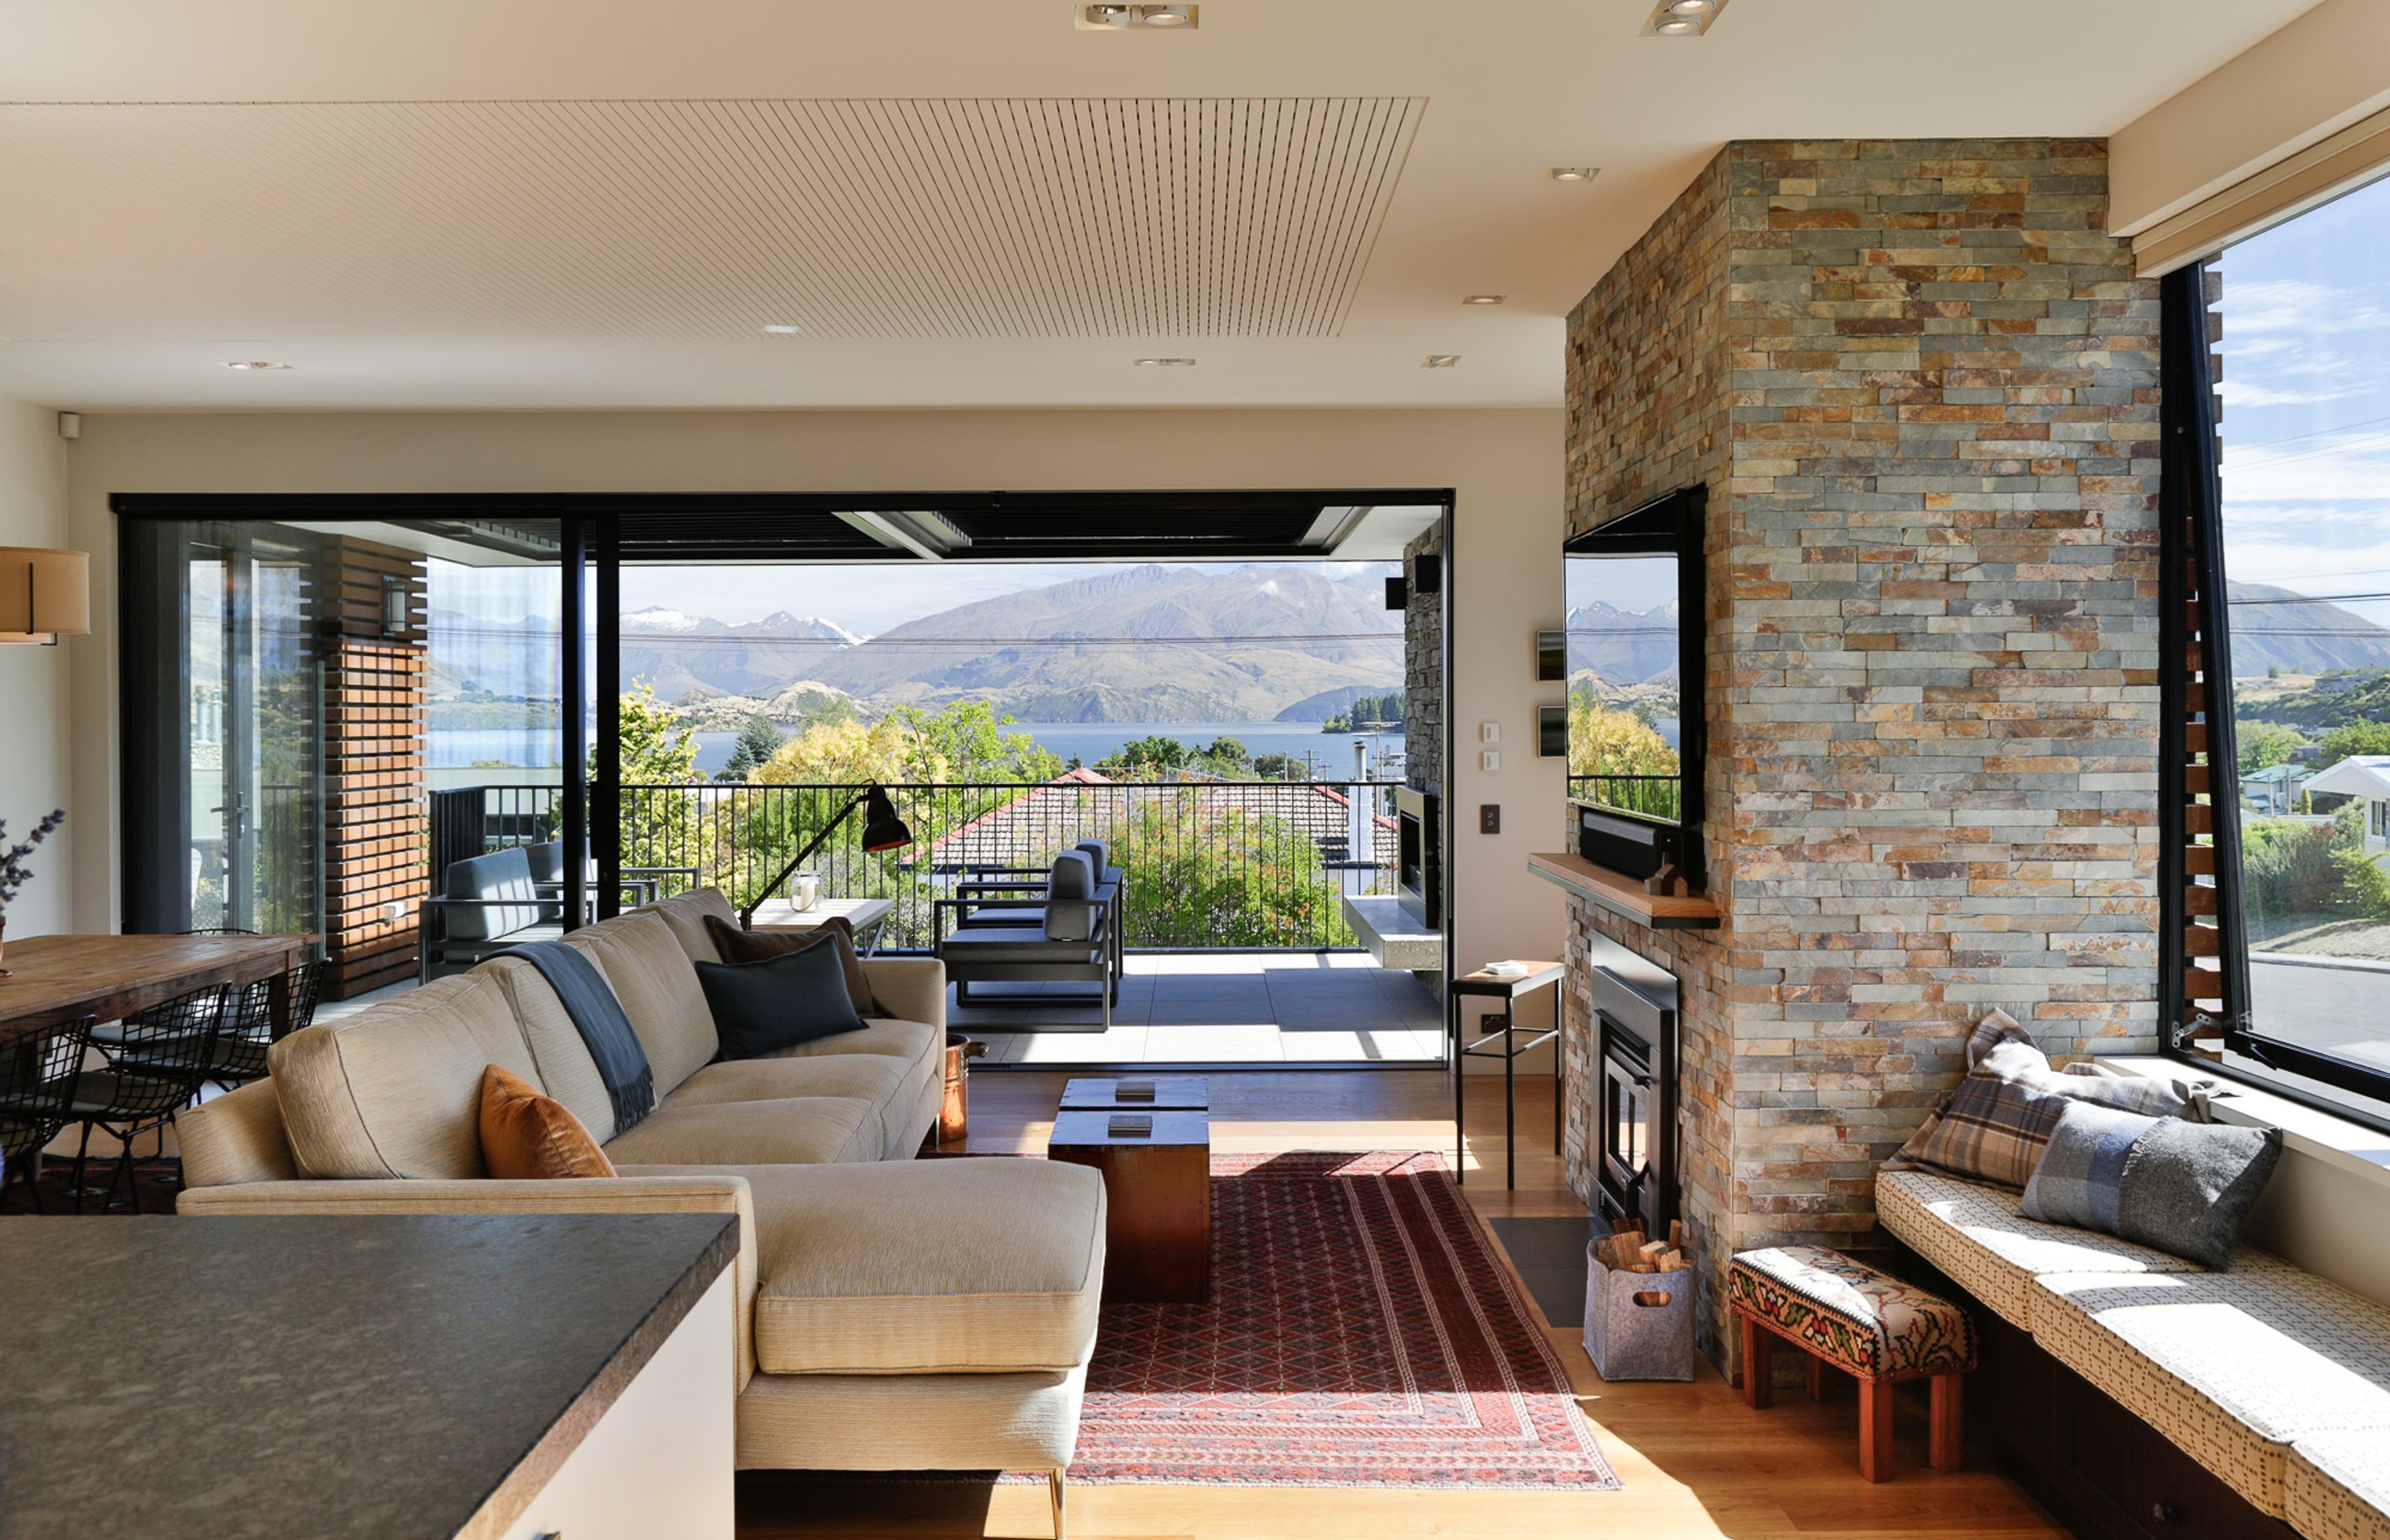 Inside the interior palette has been kept light and bright with further nods to the Otago region in the form of the fireplace cladding.